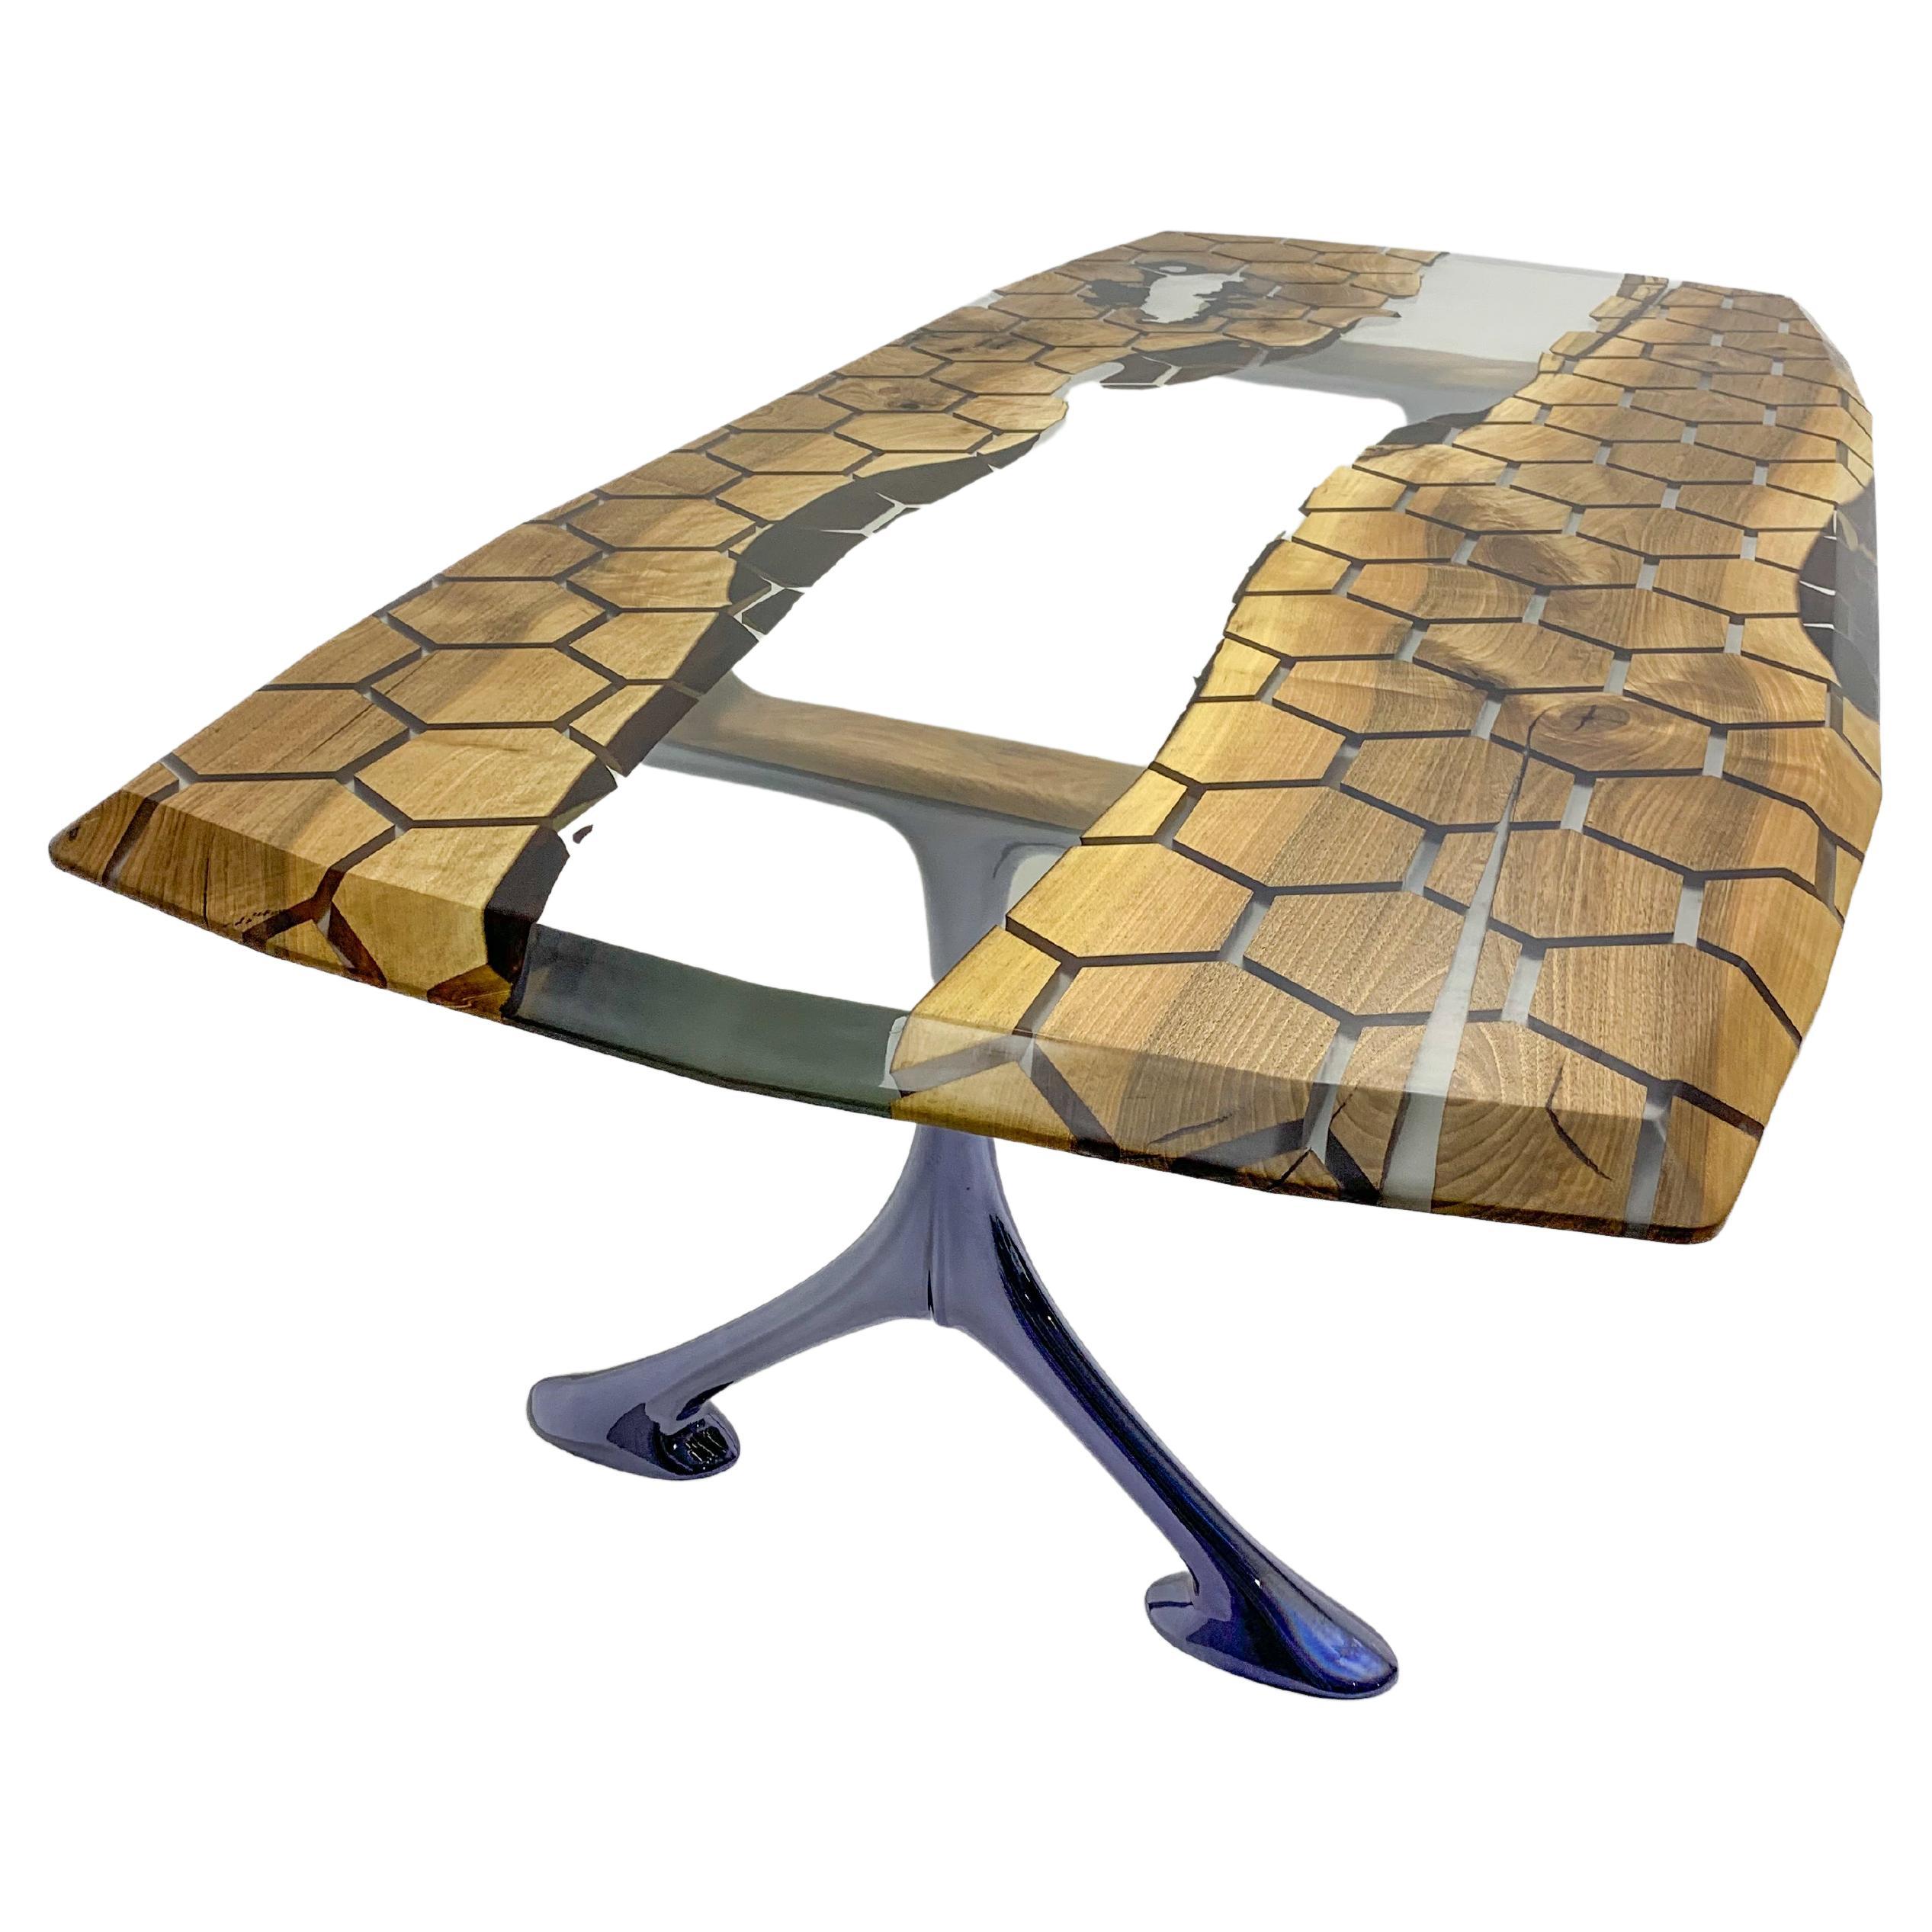 HEXAGON EPOXY TABLE 

Custom sizes & colours are available!

This epoxy table emerges as a unique work of art, inspired by nature's beauty. With its honeycomb pattern and hexagonal shapes, it offers an aesthetic delight. 

Our narrative embodies the